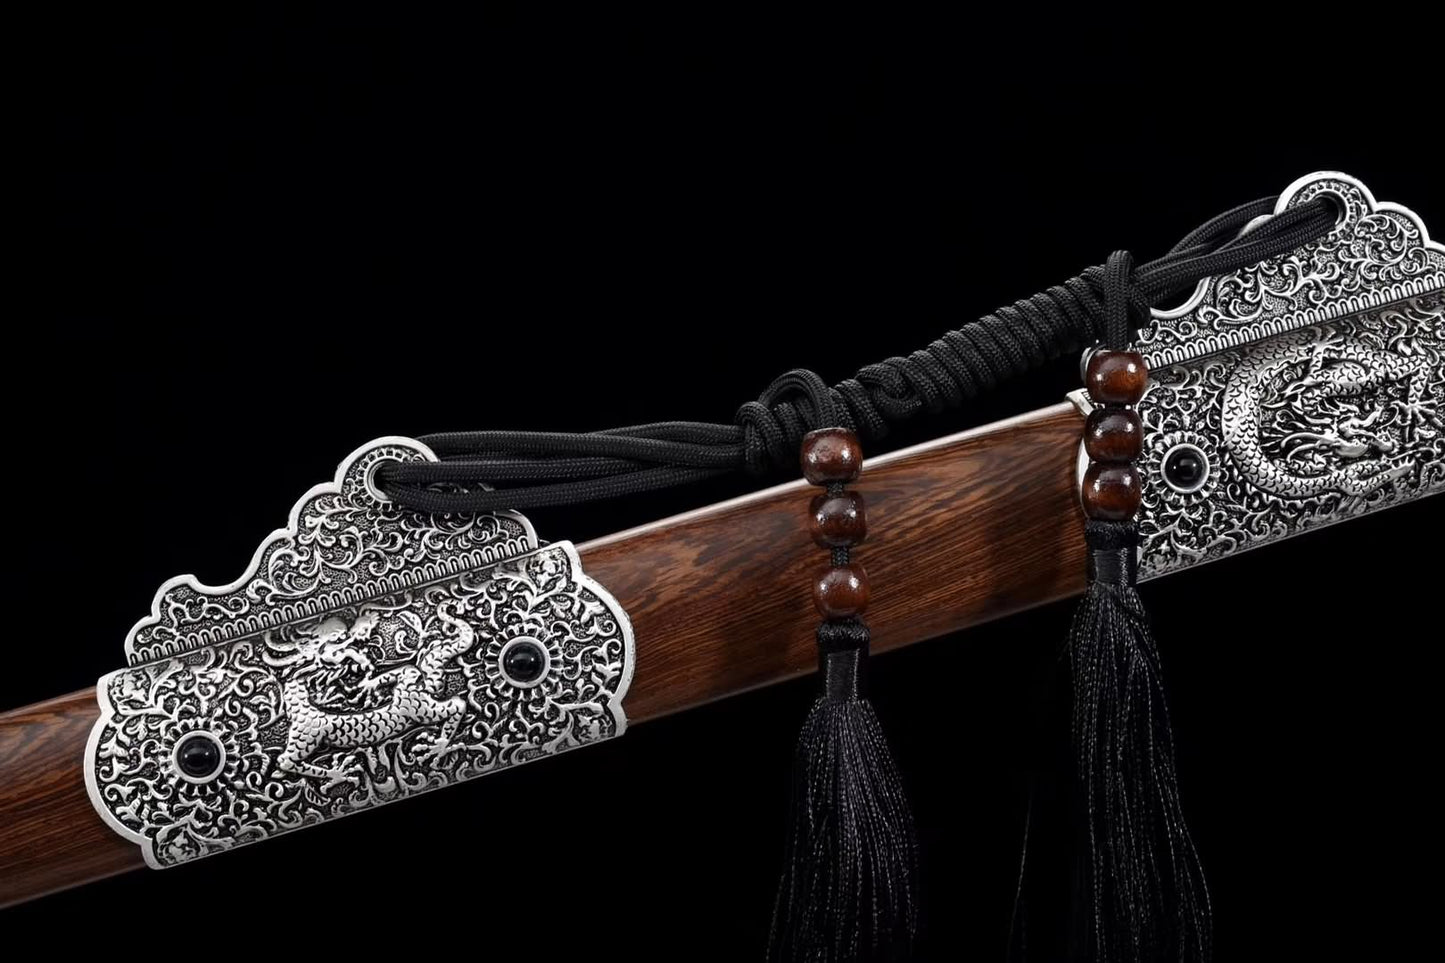 Tang dao,Handmade high carbon steel blade,Rosewood,Kirsite - Chinese sword shop